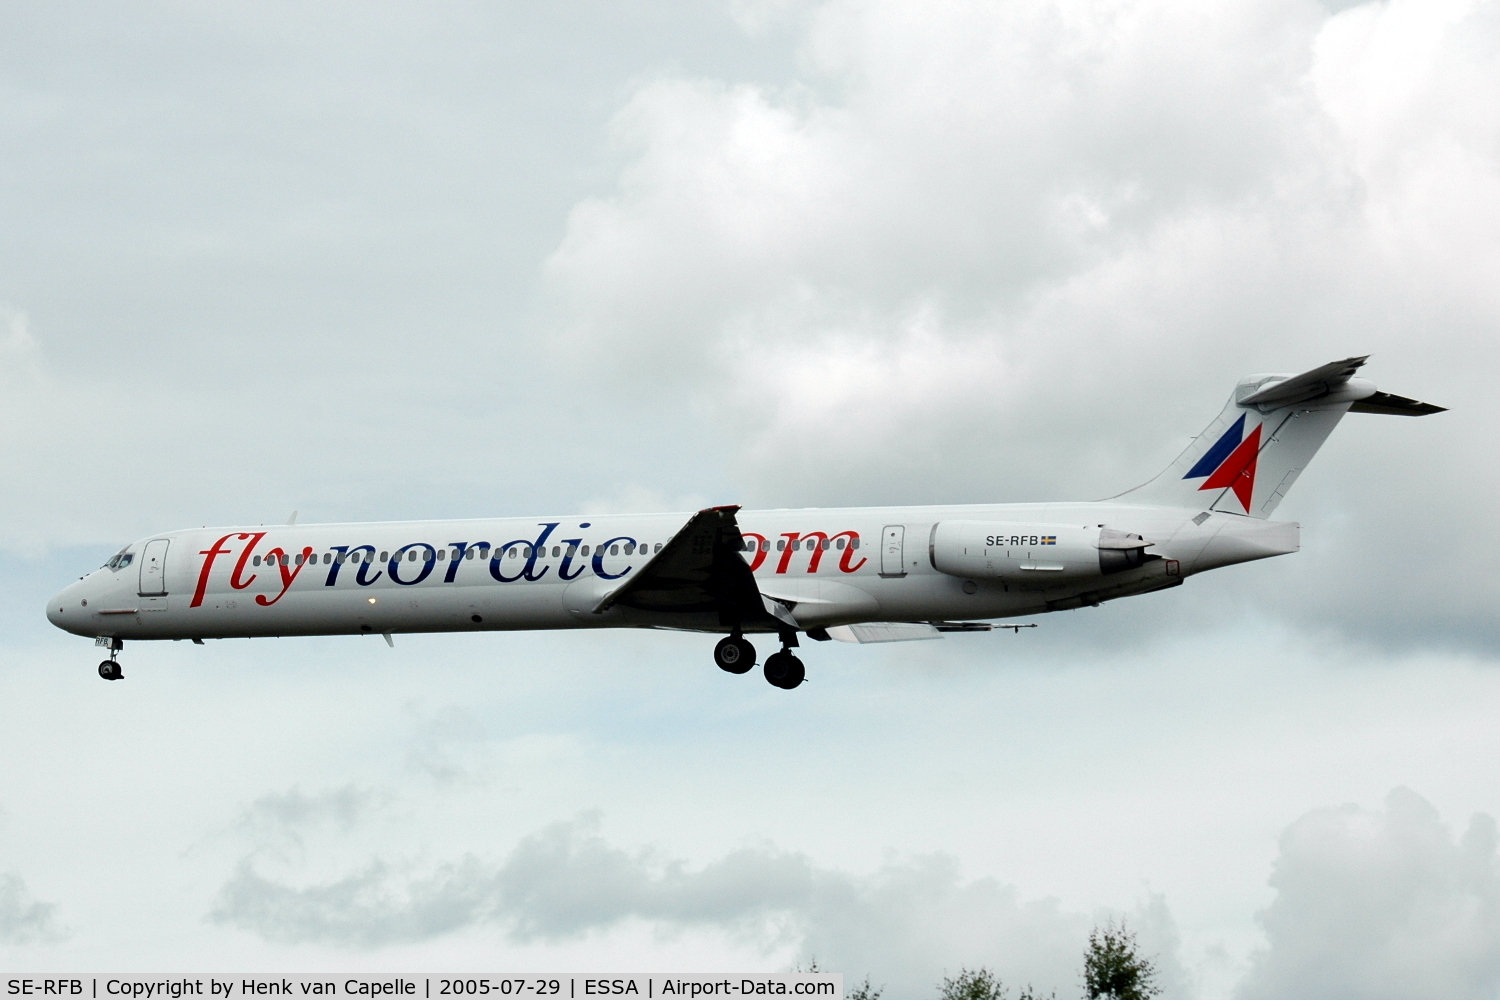 SE-RFB, 1991 McDonnell Douglas MD-82 (DC-9-82) C/N 53246, Flynordic MD-82 approaching Stockholm Arlanda airport.